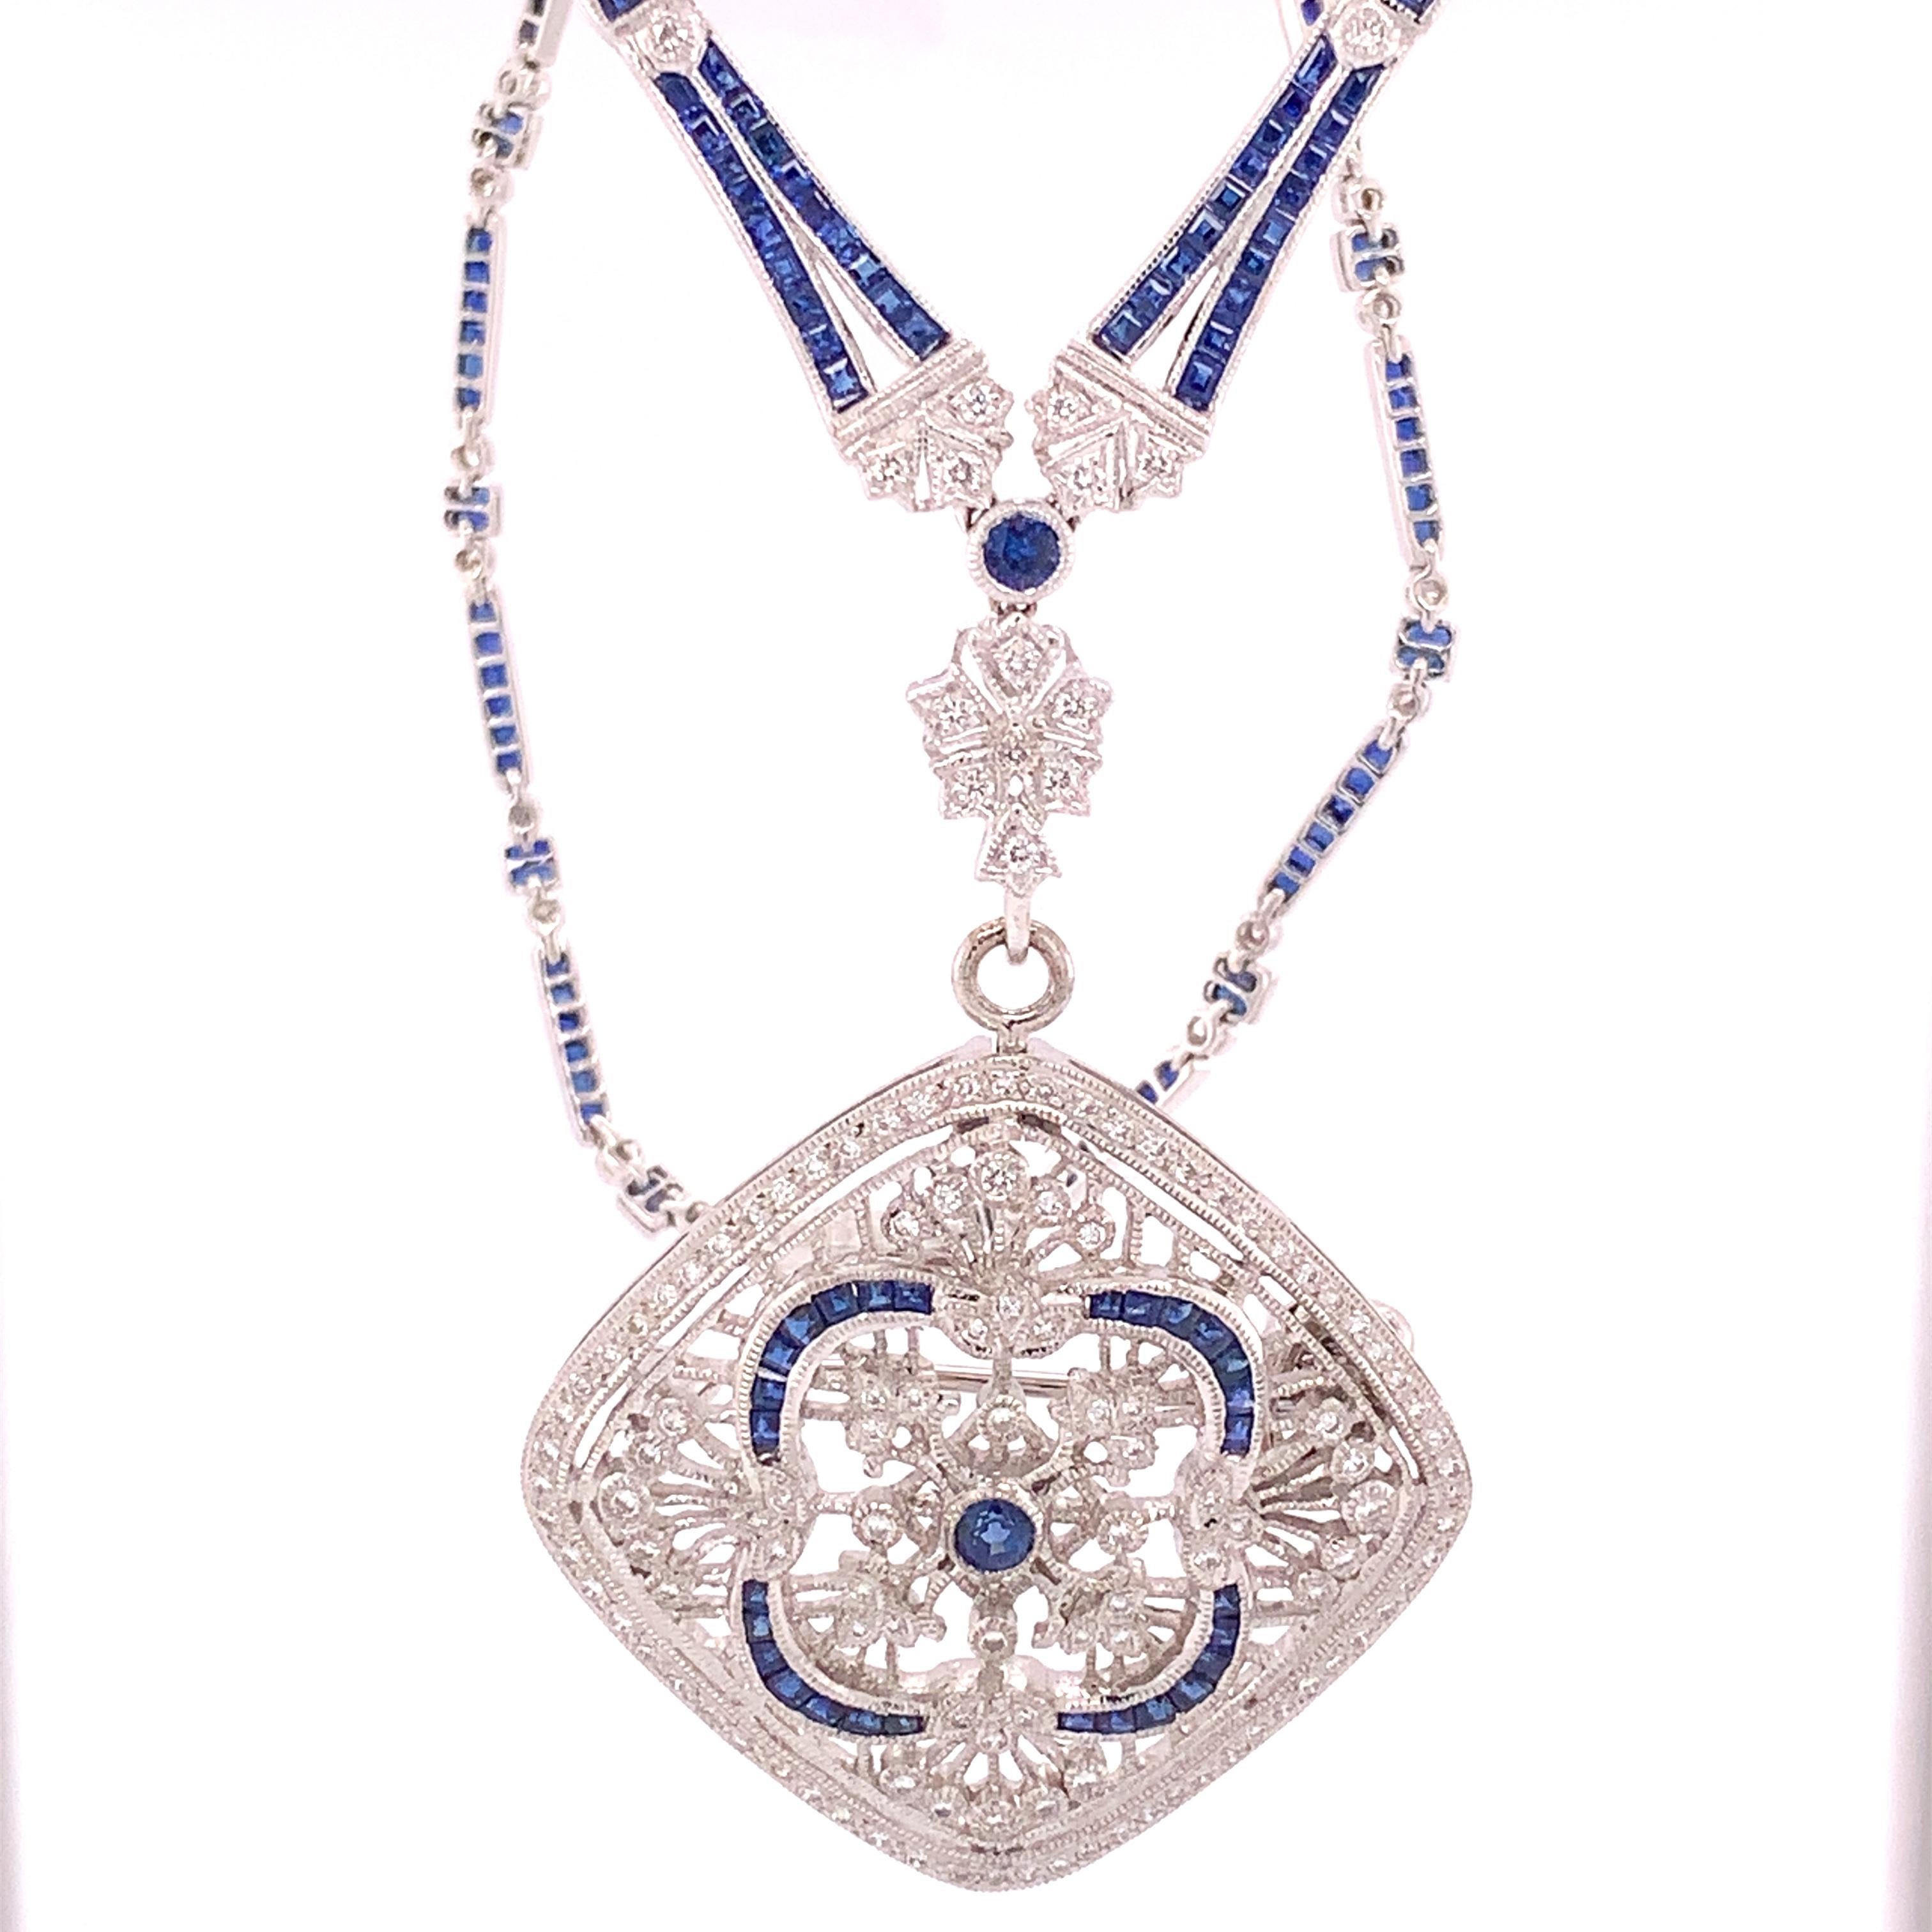 18k White Gold Genuine Natural Sapphire and Diamond Deco Style Necklace '#J4854' 1